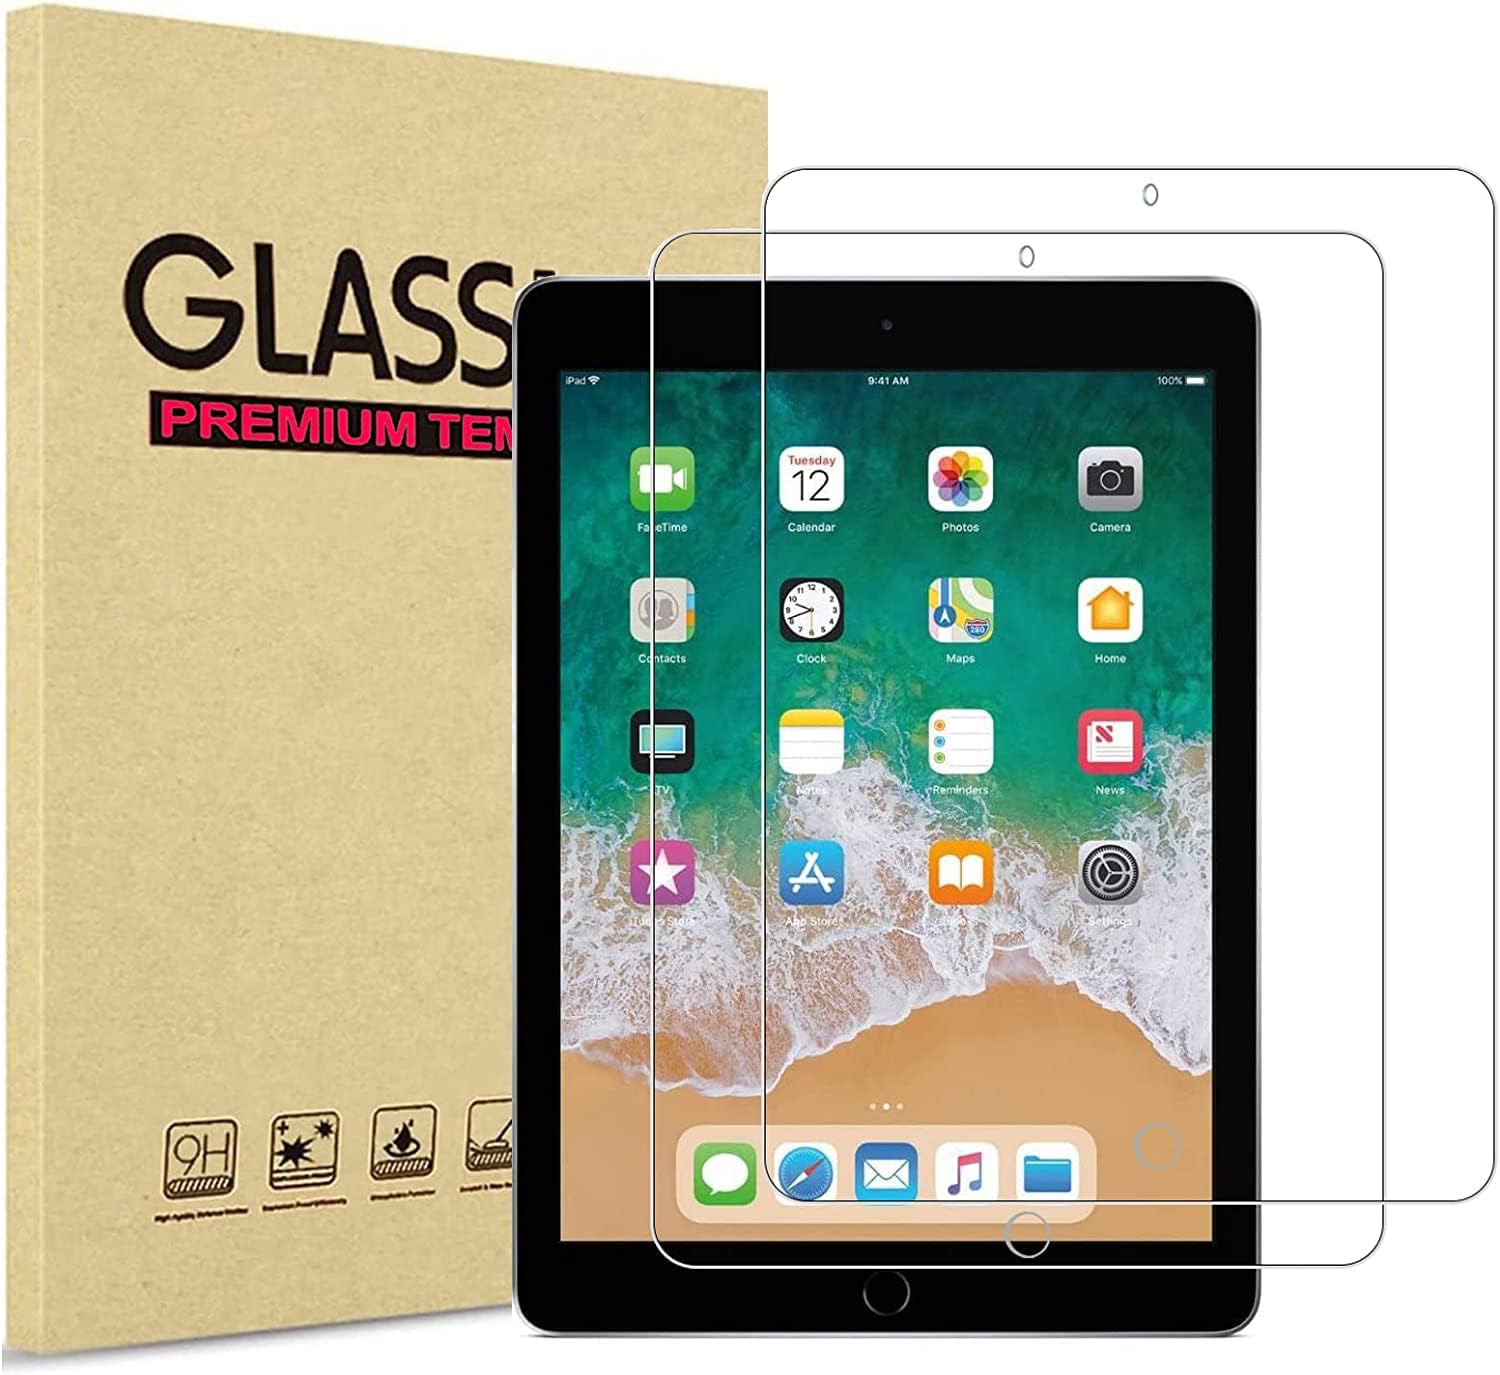 Premium Tempered Glass Screen Protector for iPad 4/3/2 *Free Shipping*